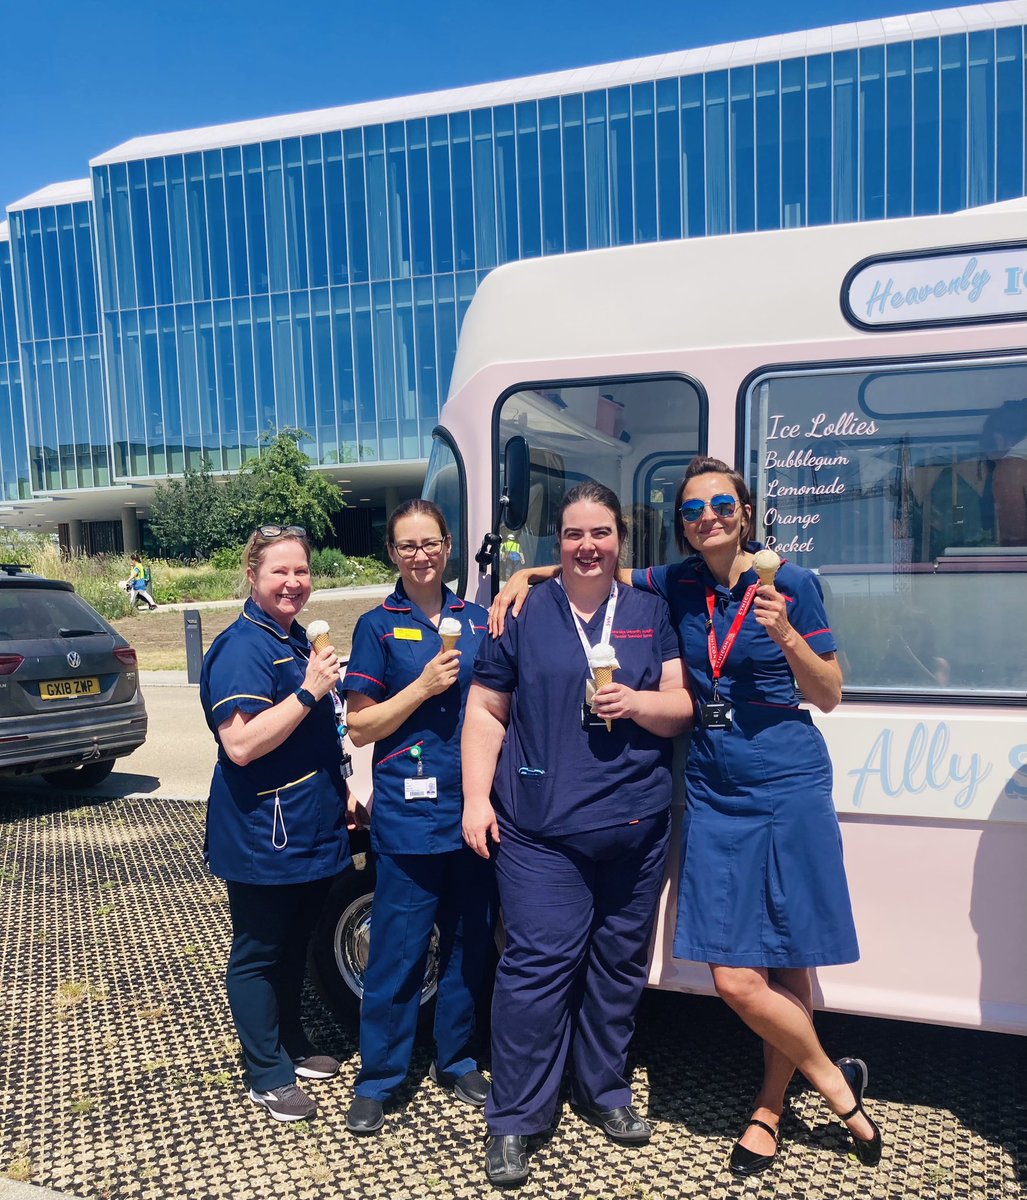 Work work work!! This will make you drool!!! And the ice creams!😂 @sweetallyscoops @Vici23178426 @PennyCribb @kimg_brown glorious hard working SVNs! @vascularnurses  @CUH_NHS thanks @RoyalPapworth for looking after us! @chloejade78 enjoy loose women!😁